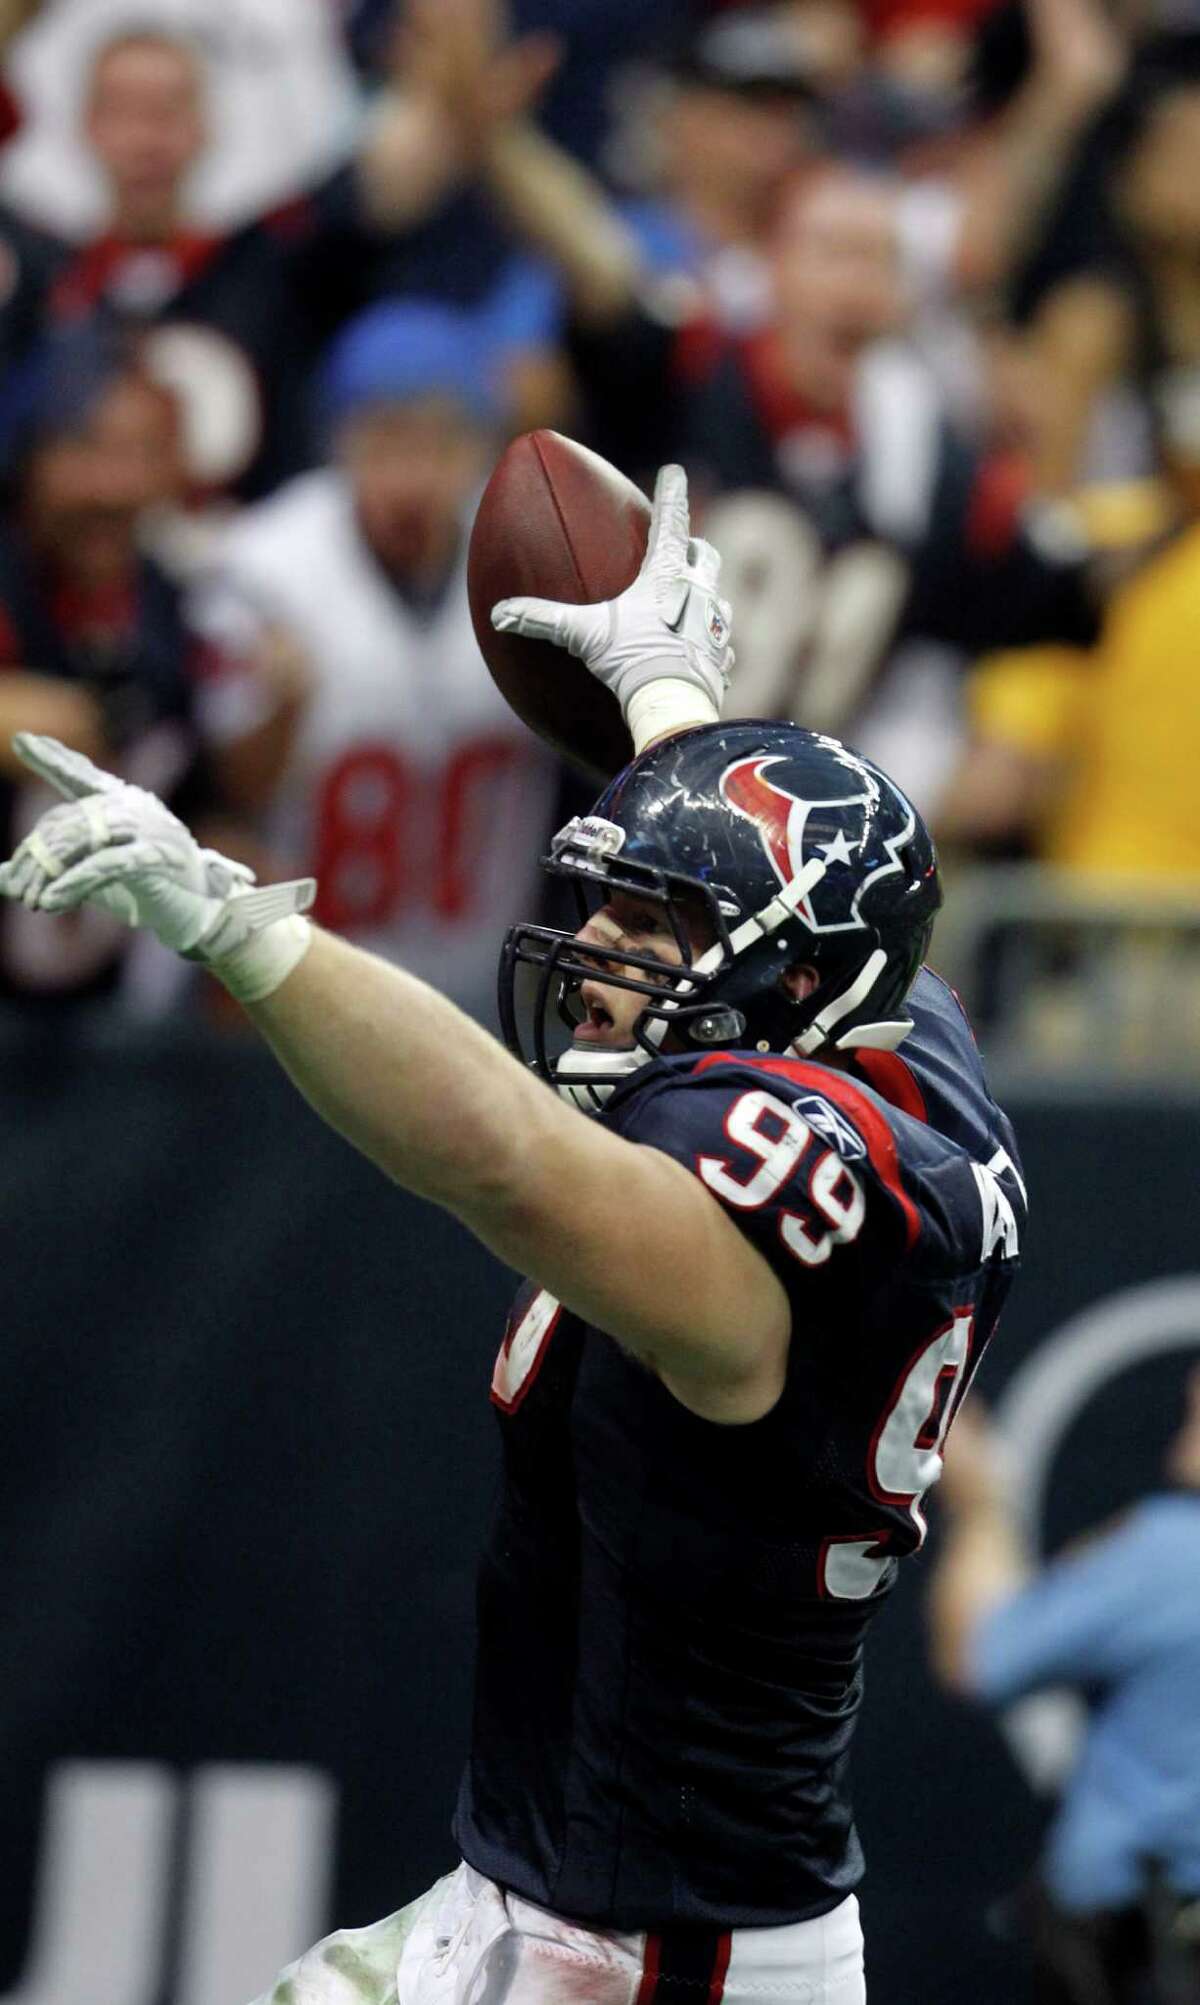 Texans defensive end J.J. Watt celebrates after returning an interception 29 yards for a touchdown against the Bengals in last season's wild-card victory at Reliant Stadium.